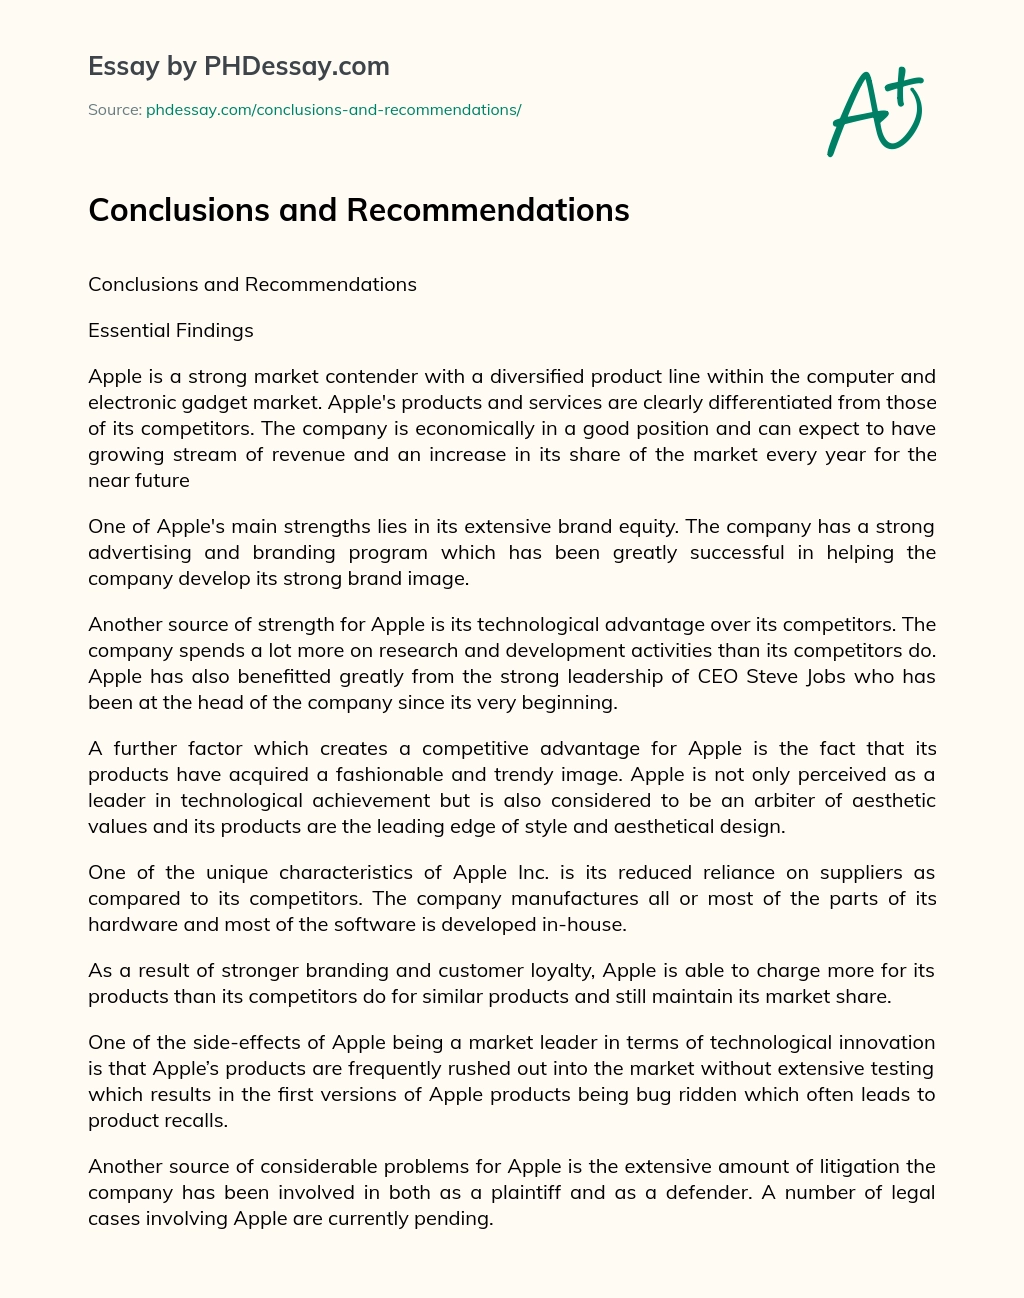 Conclusions and Recommendations essay